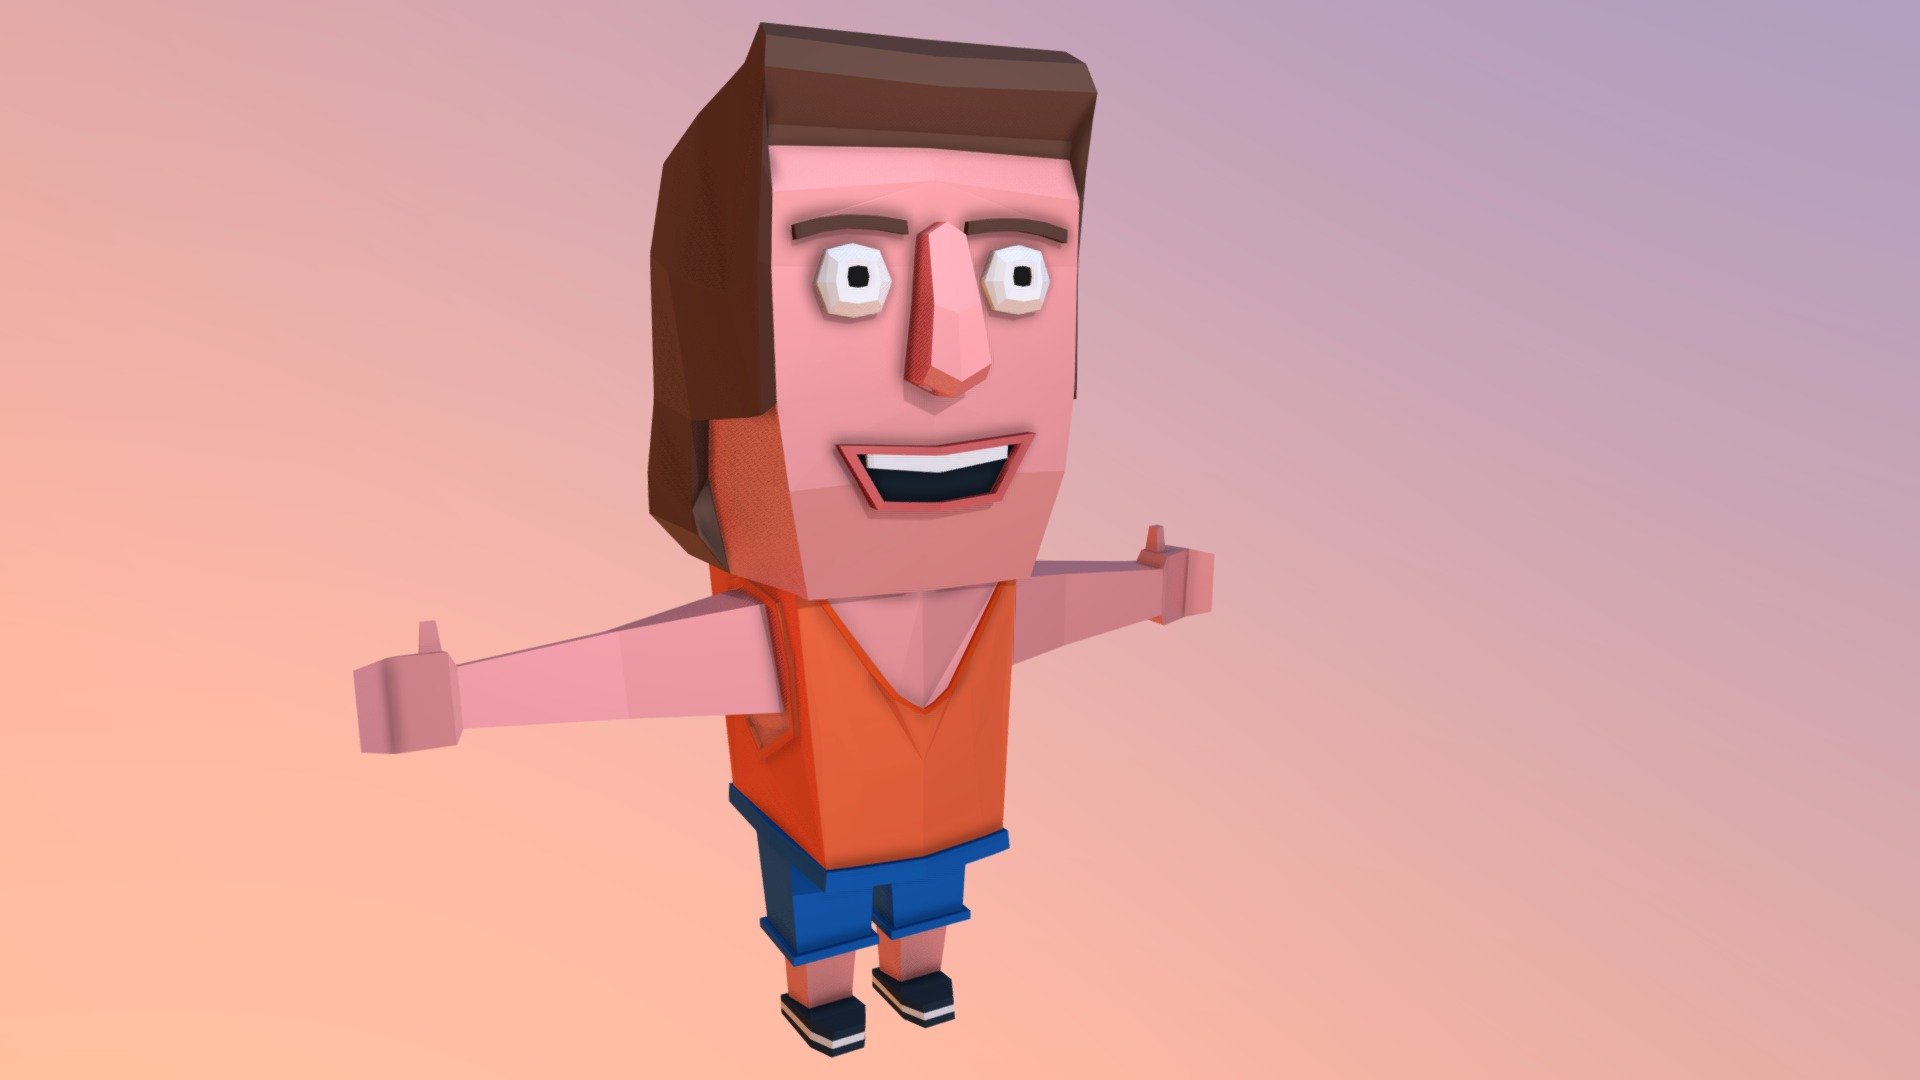 Chico cubo  lowpoly guy (rigged)